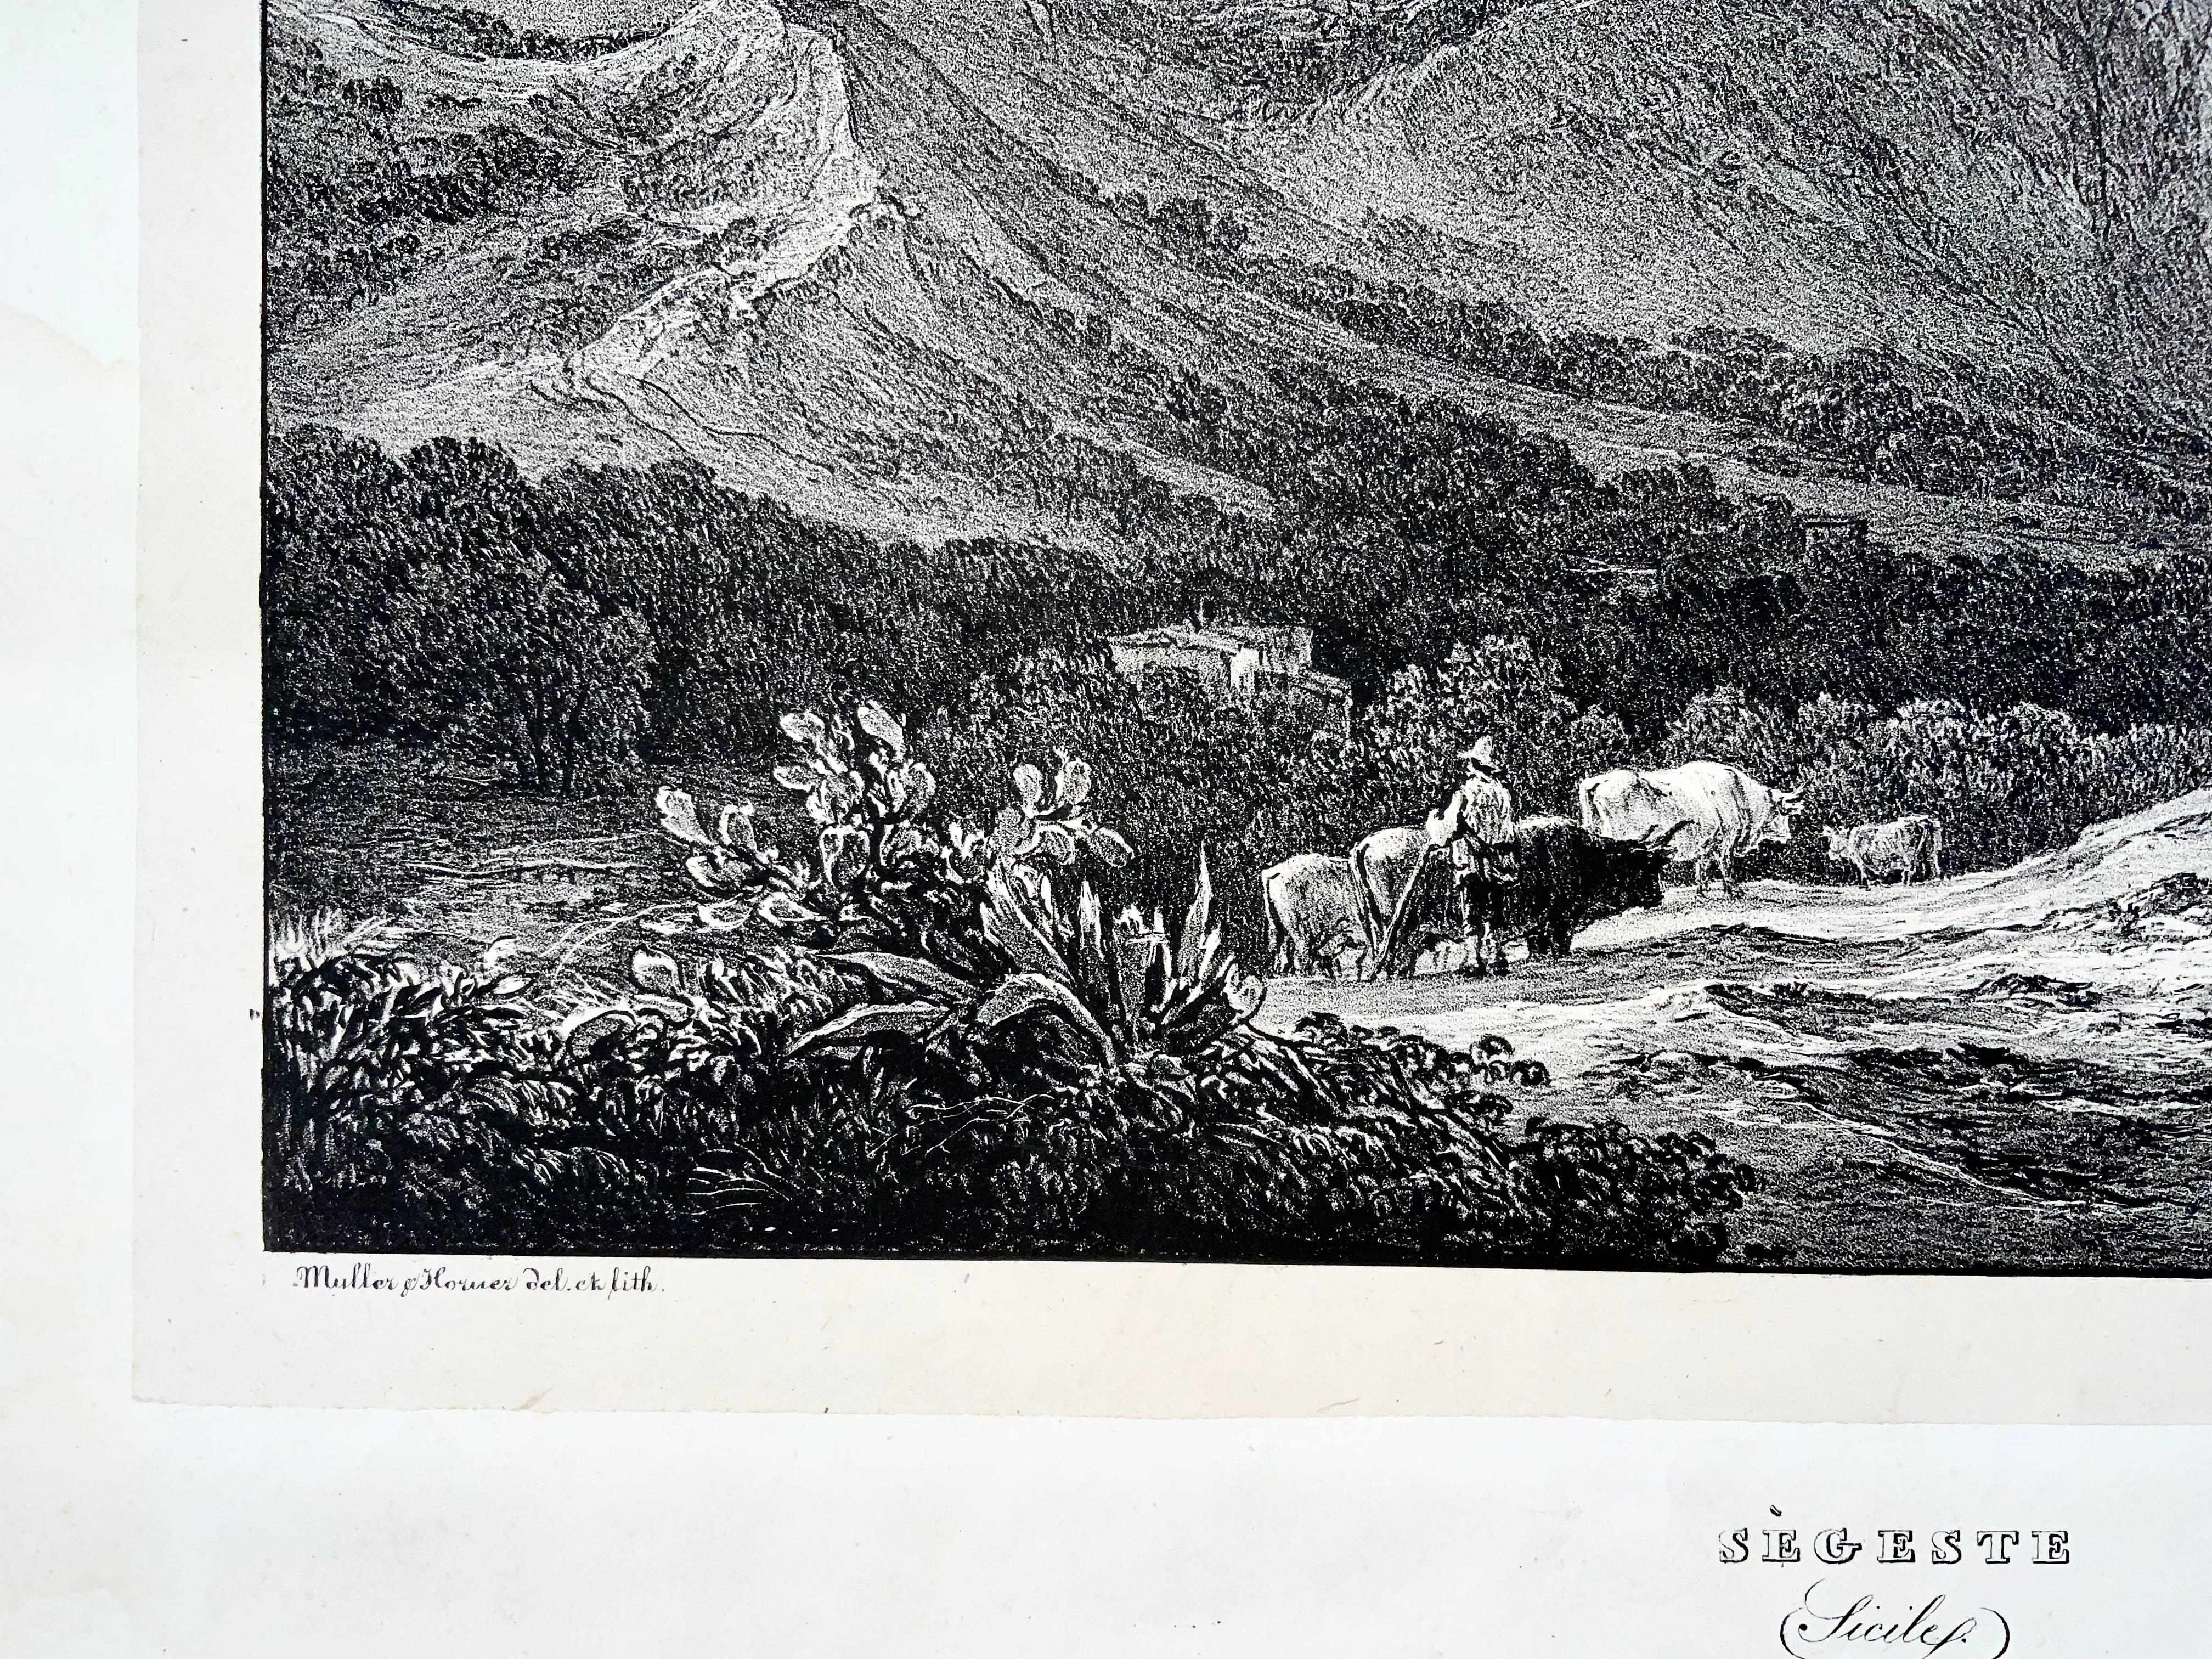 1833 Segesta Sicily, Muller & Horner, LeDoux Sc., Large Stone Lithograph In Good Condition For Sale In Norwich, GB